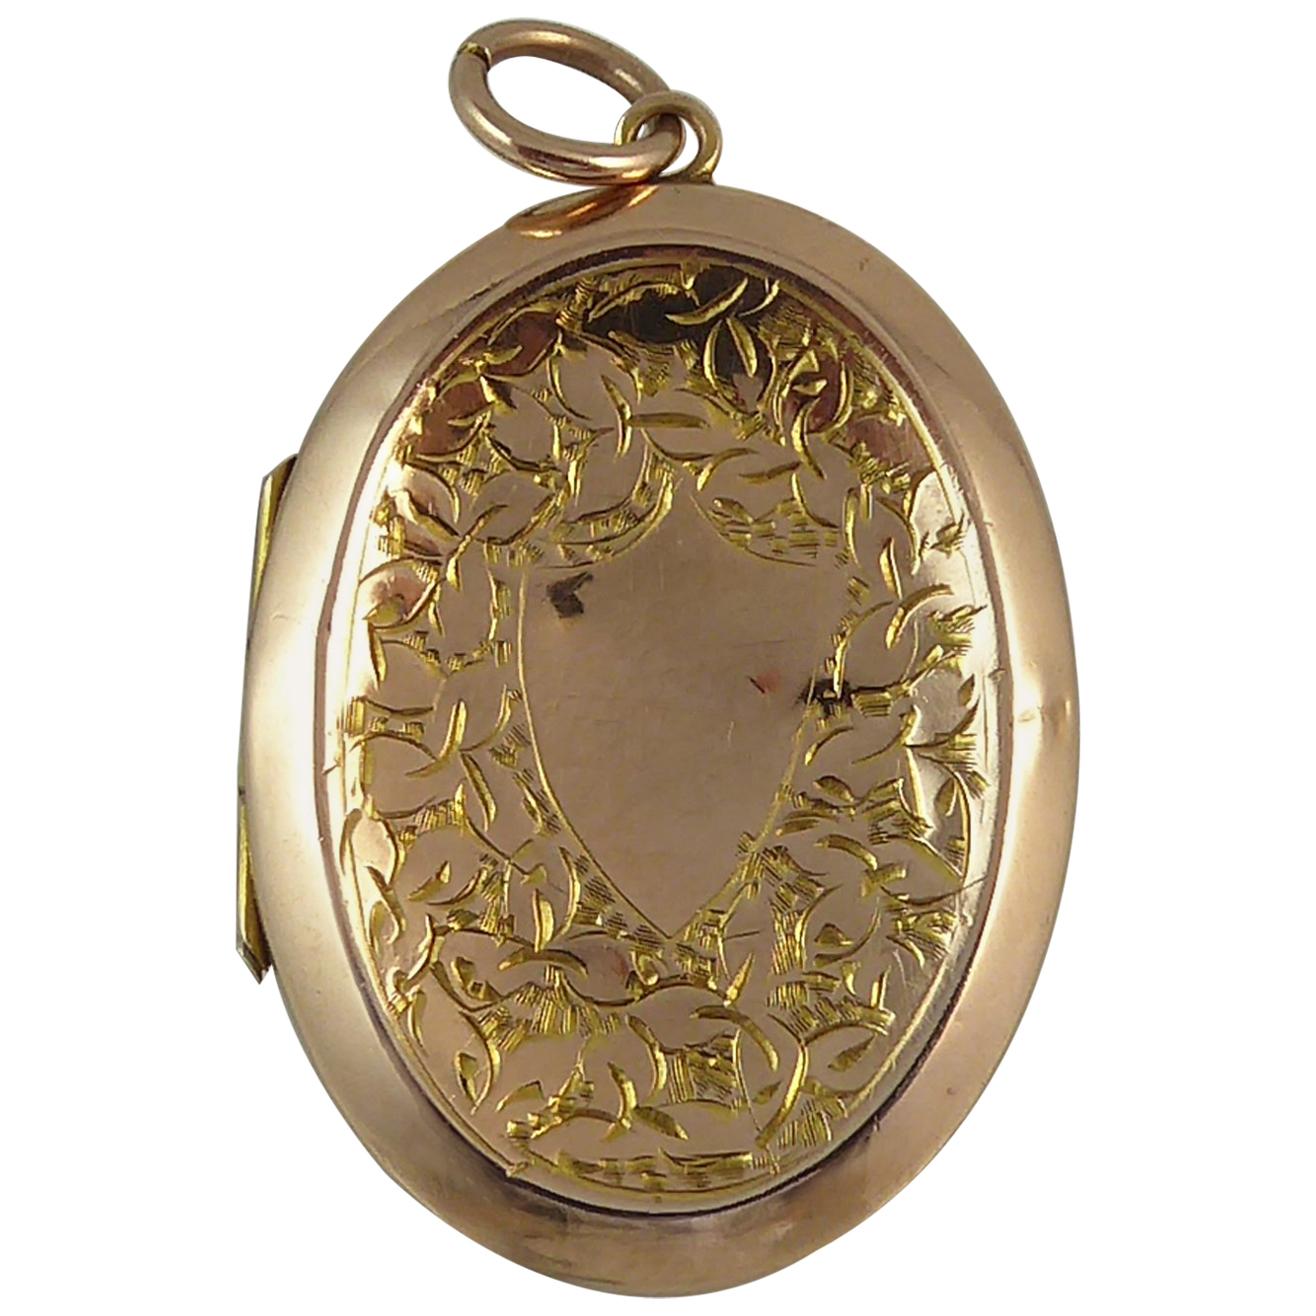 Antique Engraved Locket, Gold Back and Front, circa 1900, Late Victorian